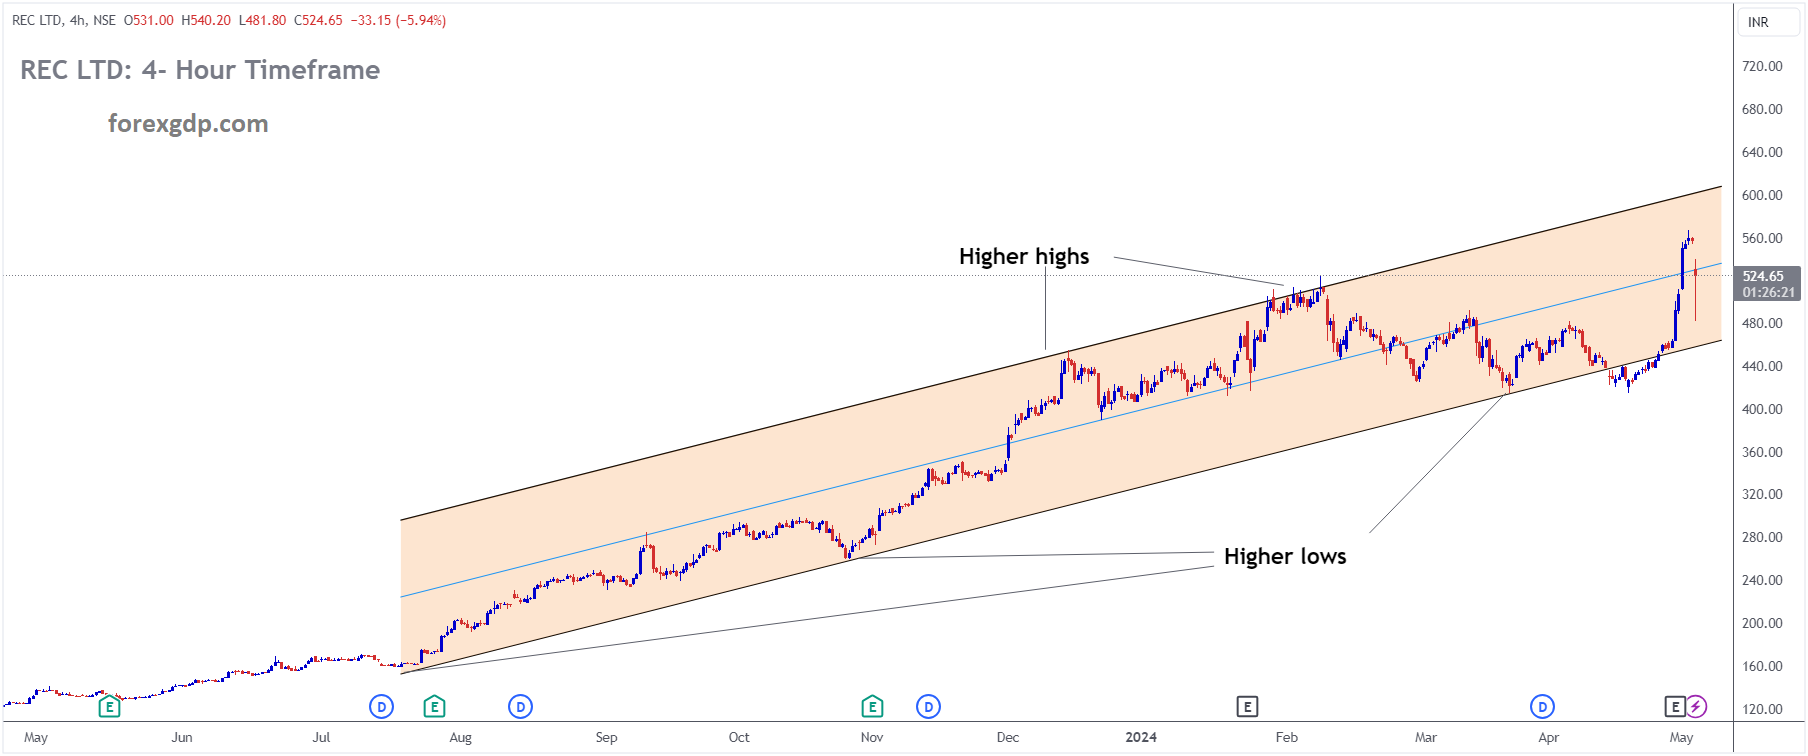 REC LTD Market price is moving in Ascending channel and market has rebounded from the higher low area of the channel